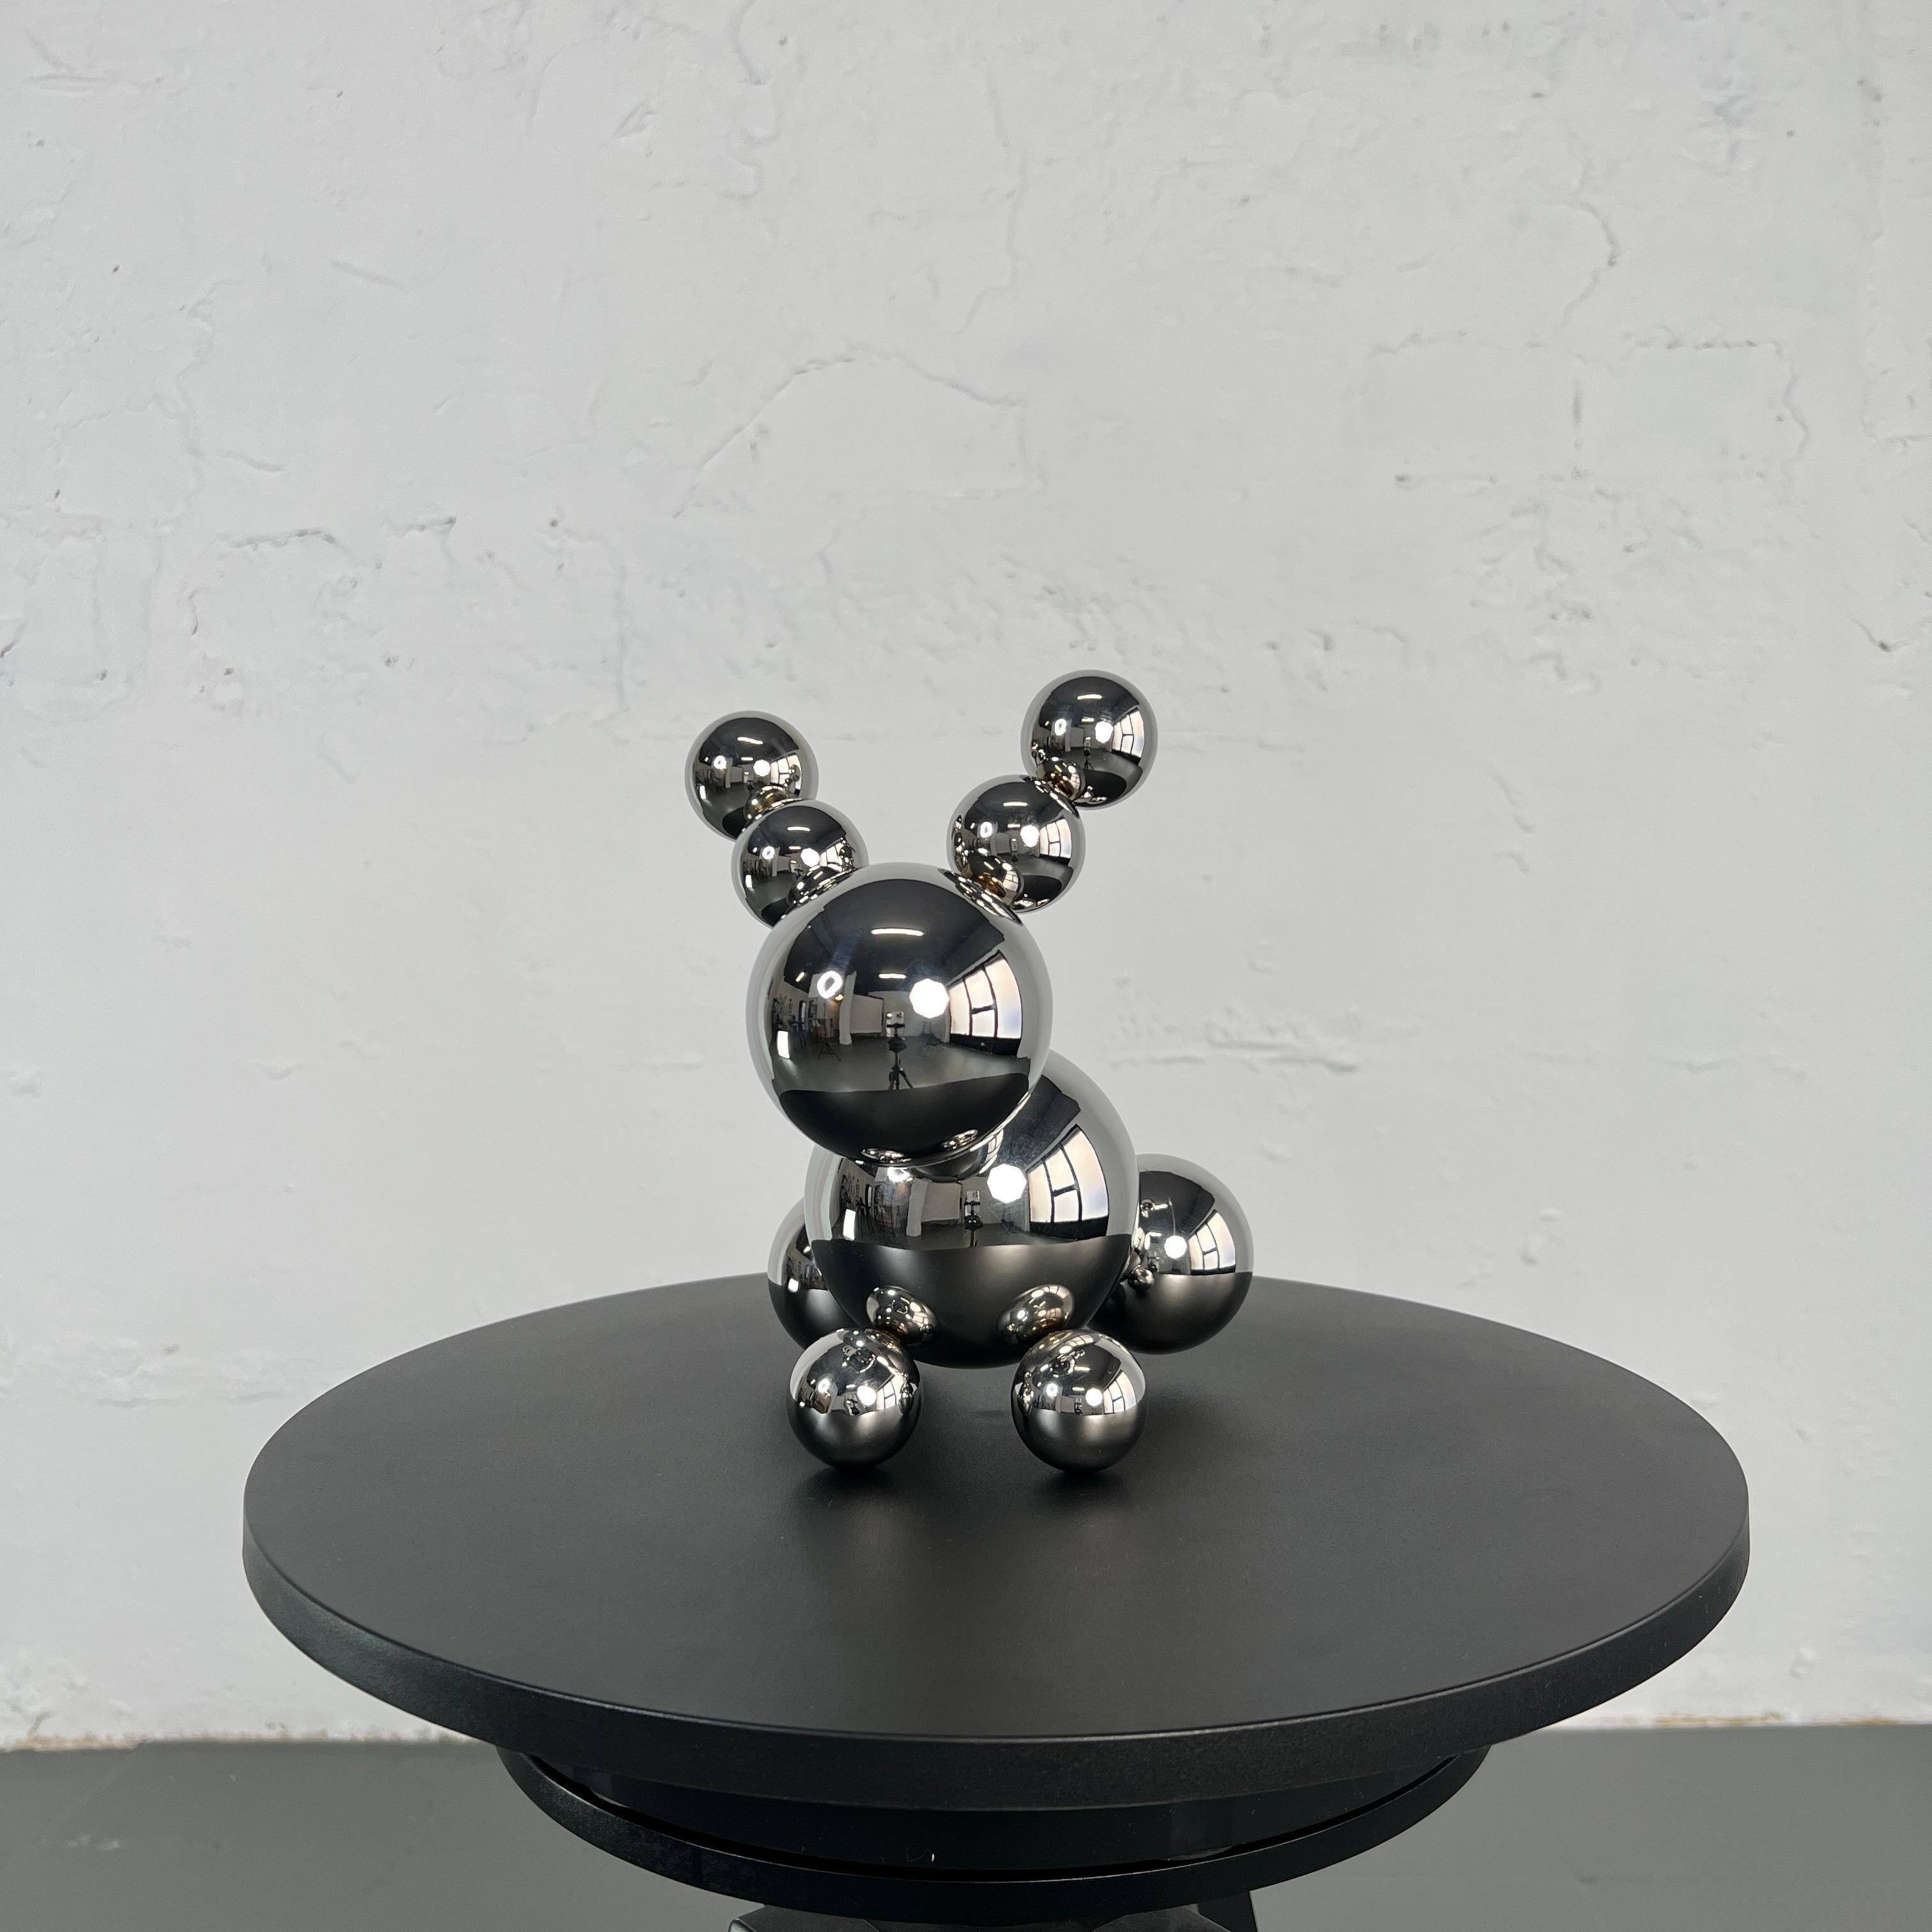 Stainless Steel Rabbit Bunny Robot 'Ears Up!' Minimalistic Art For Sale 2